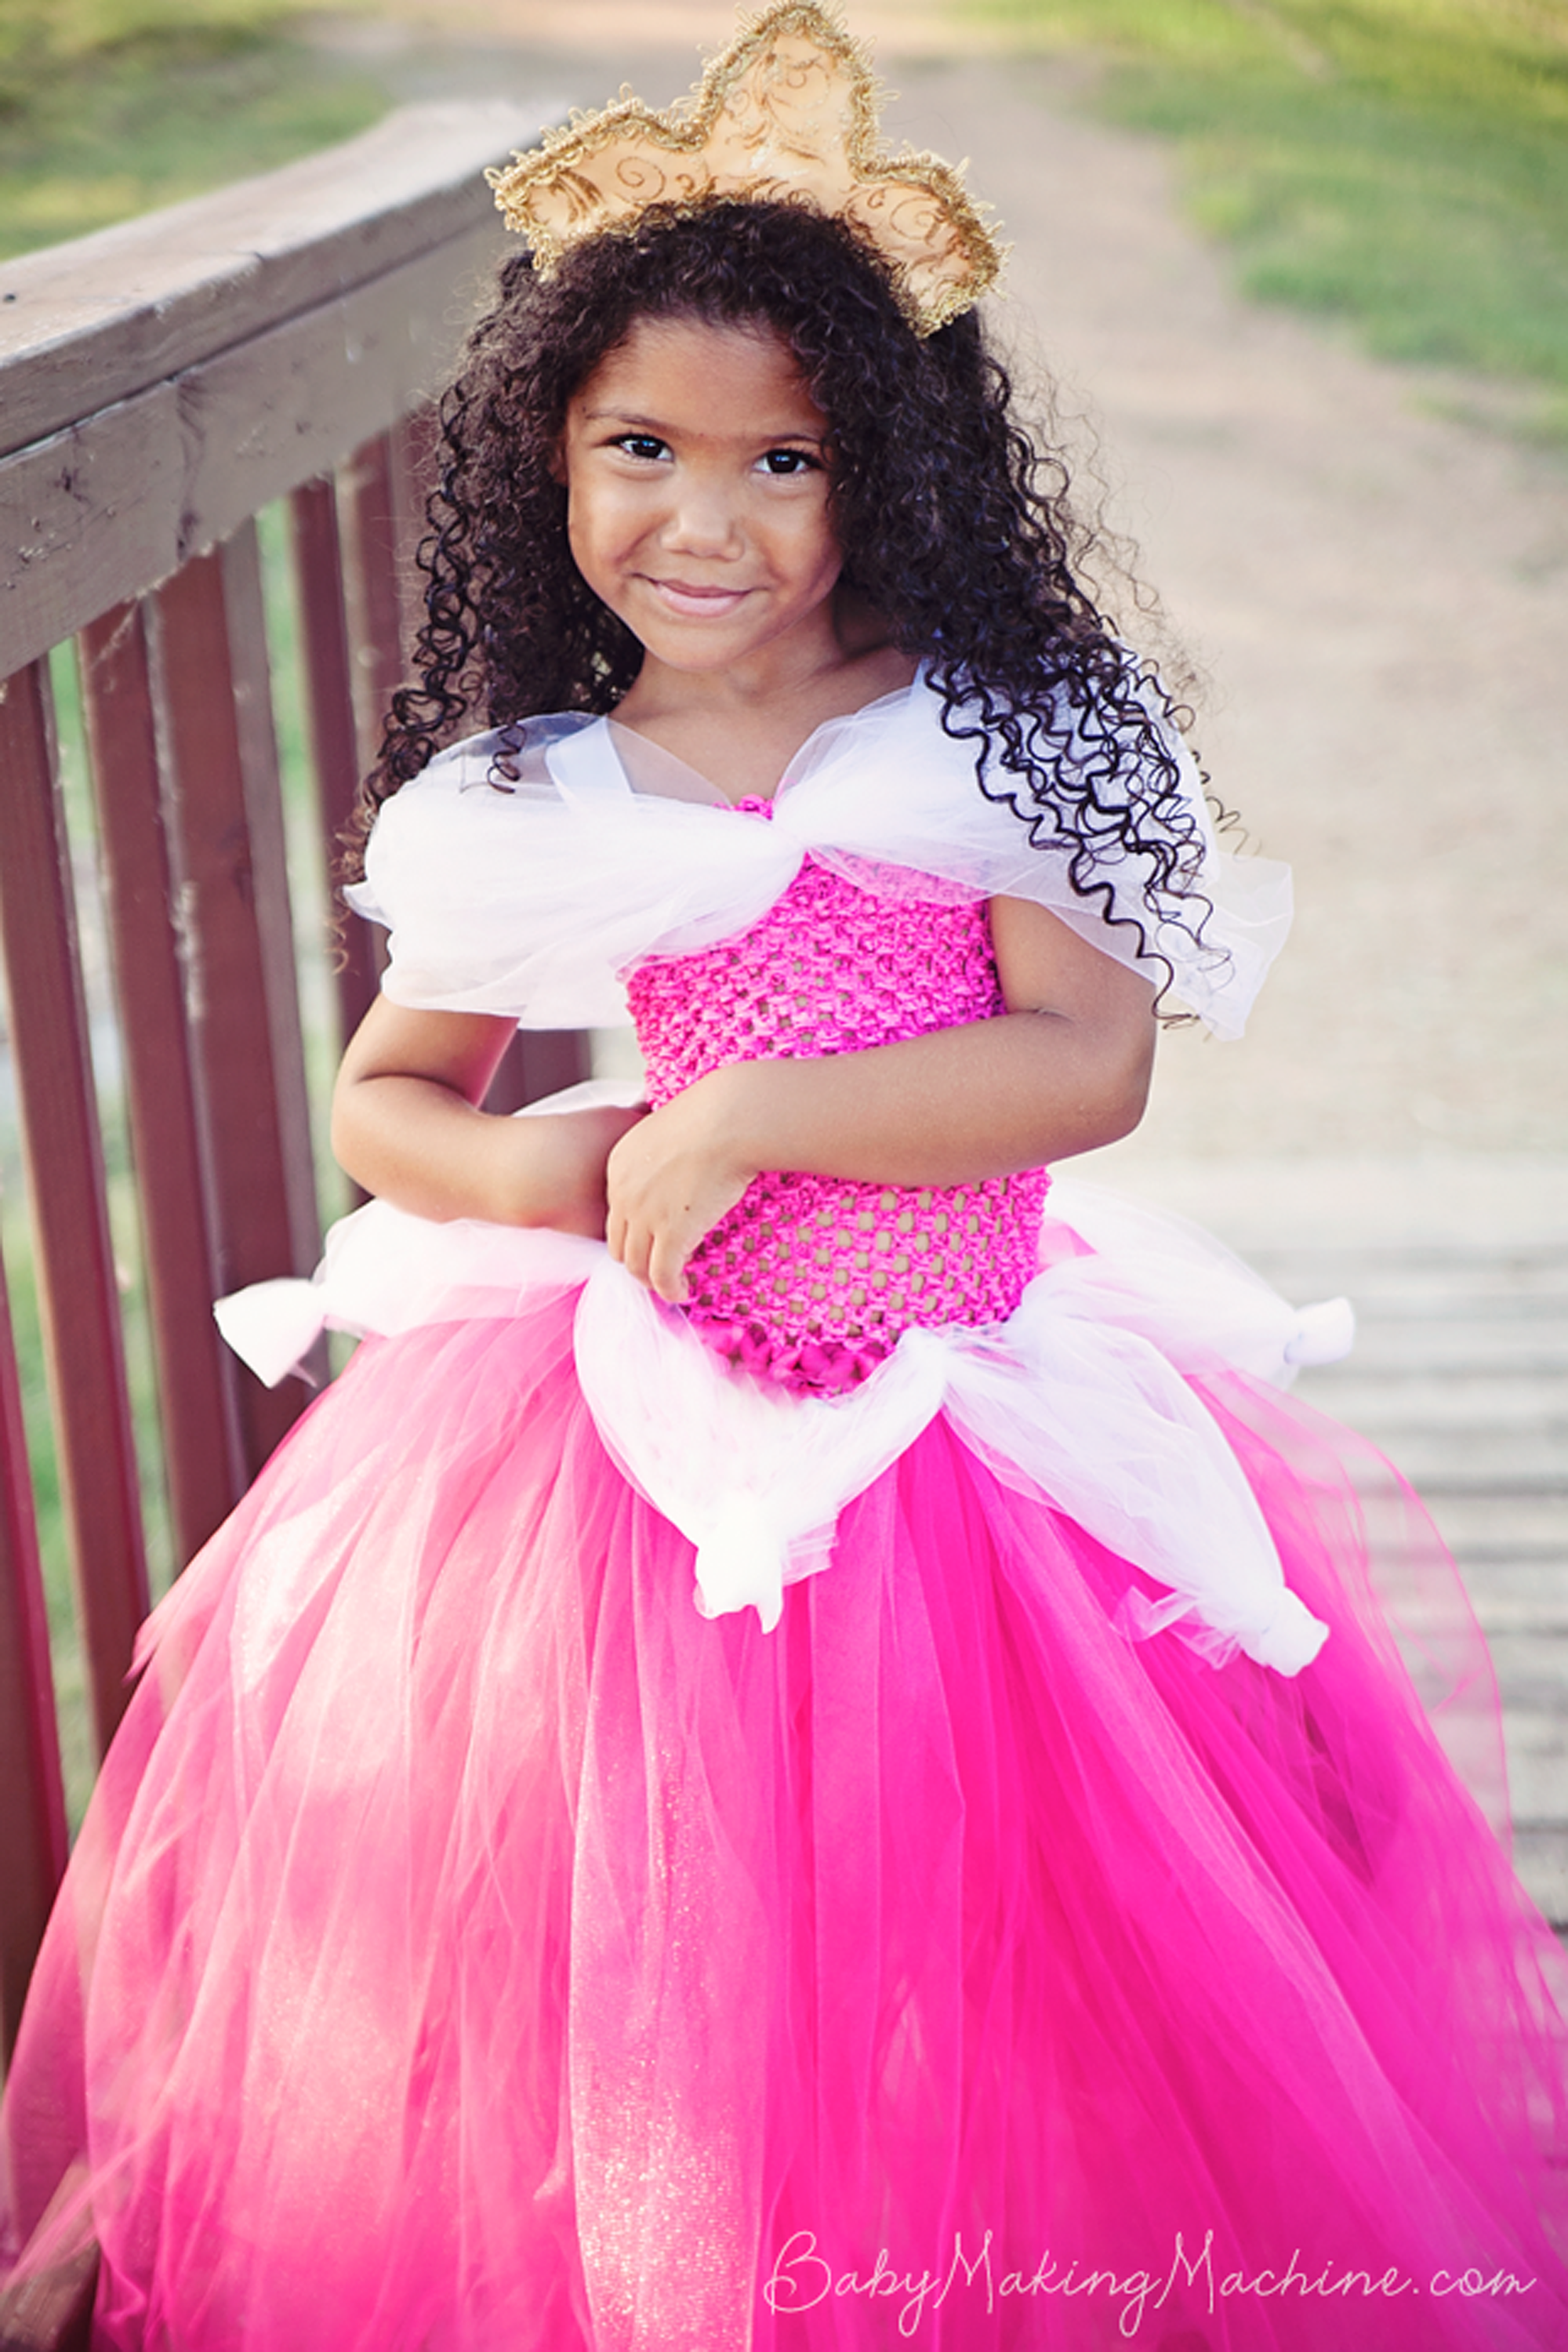 Princess costumes for girls